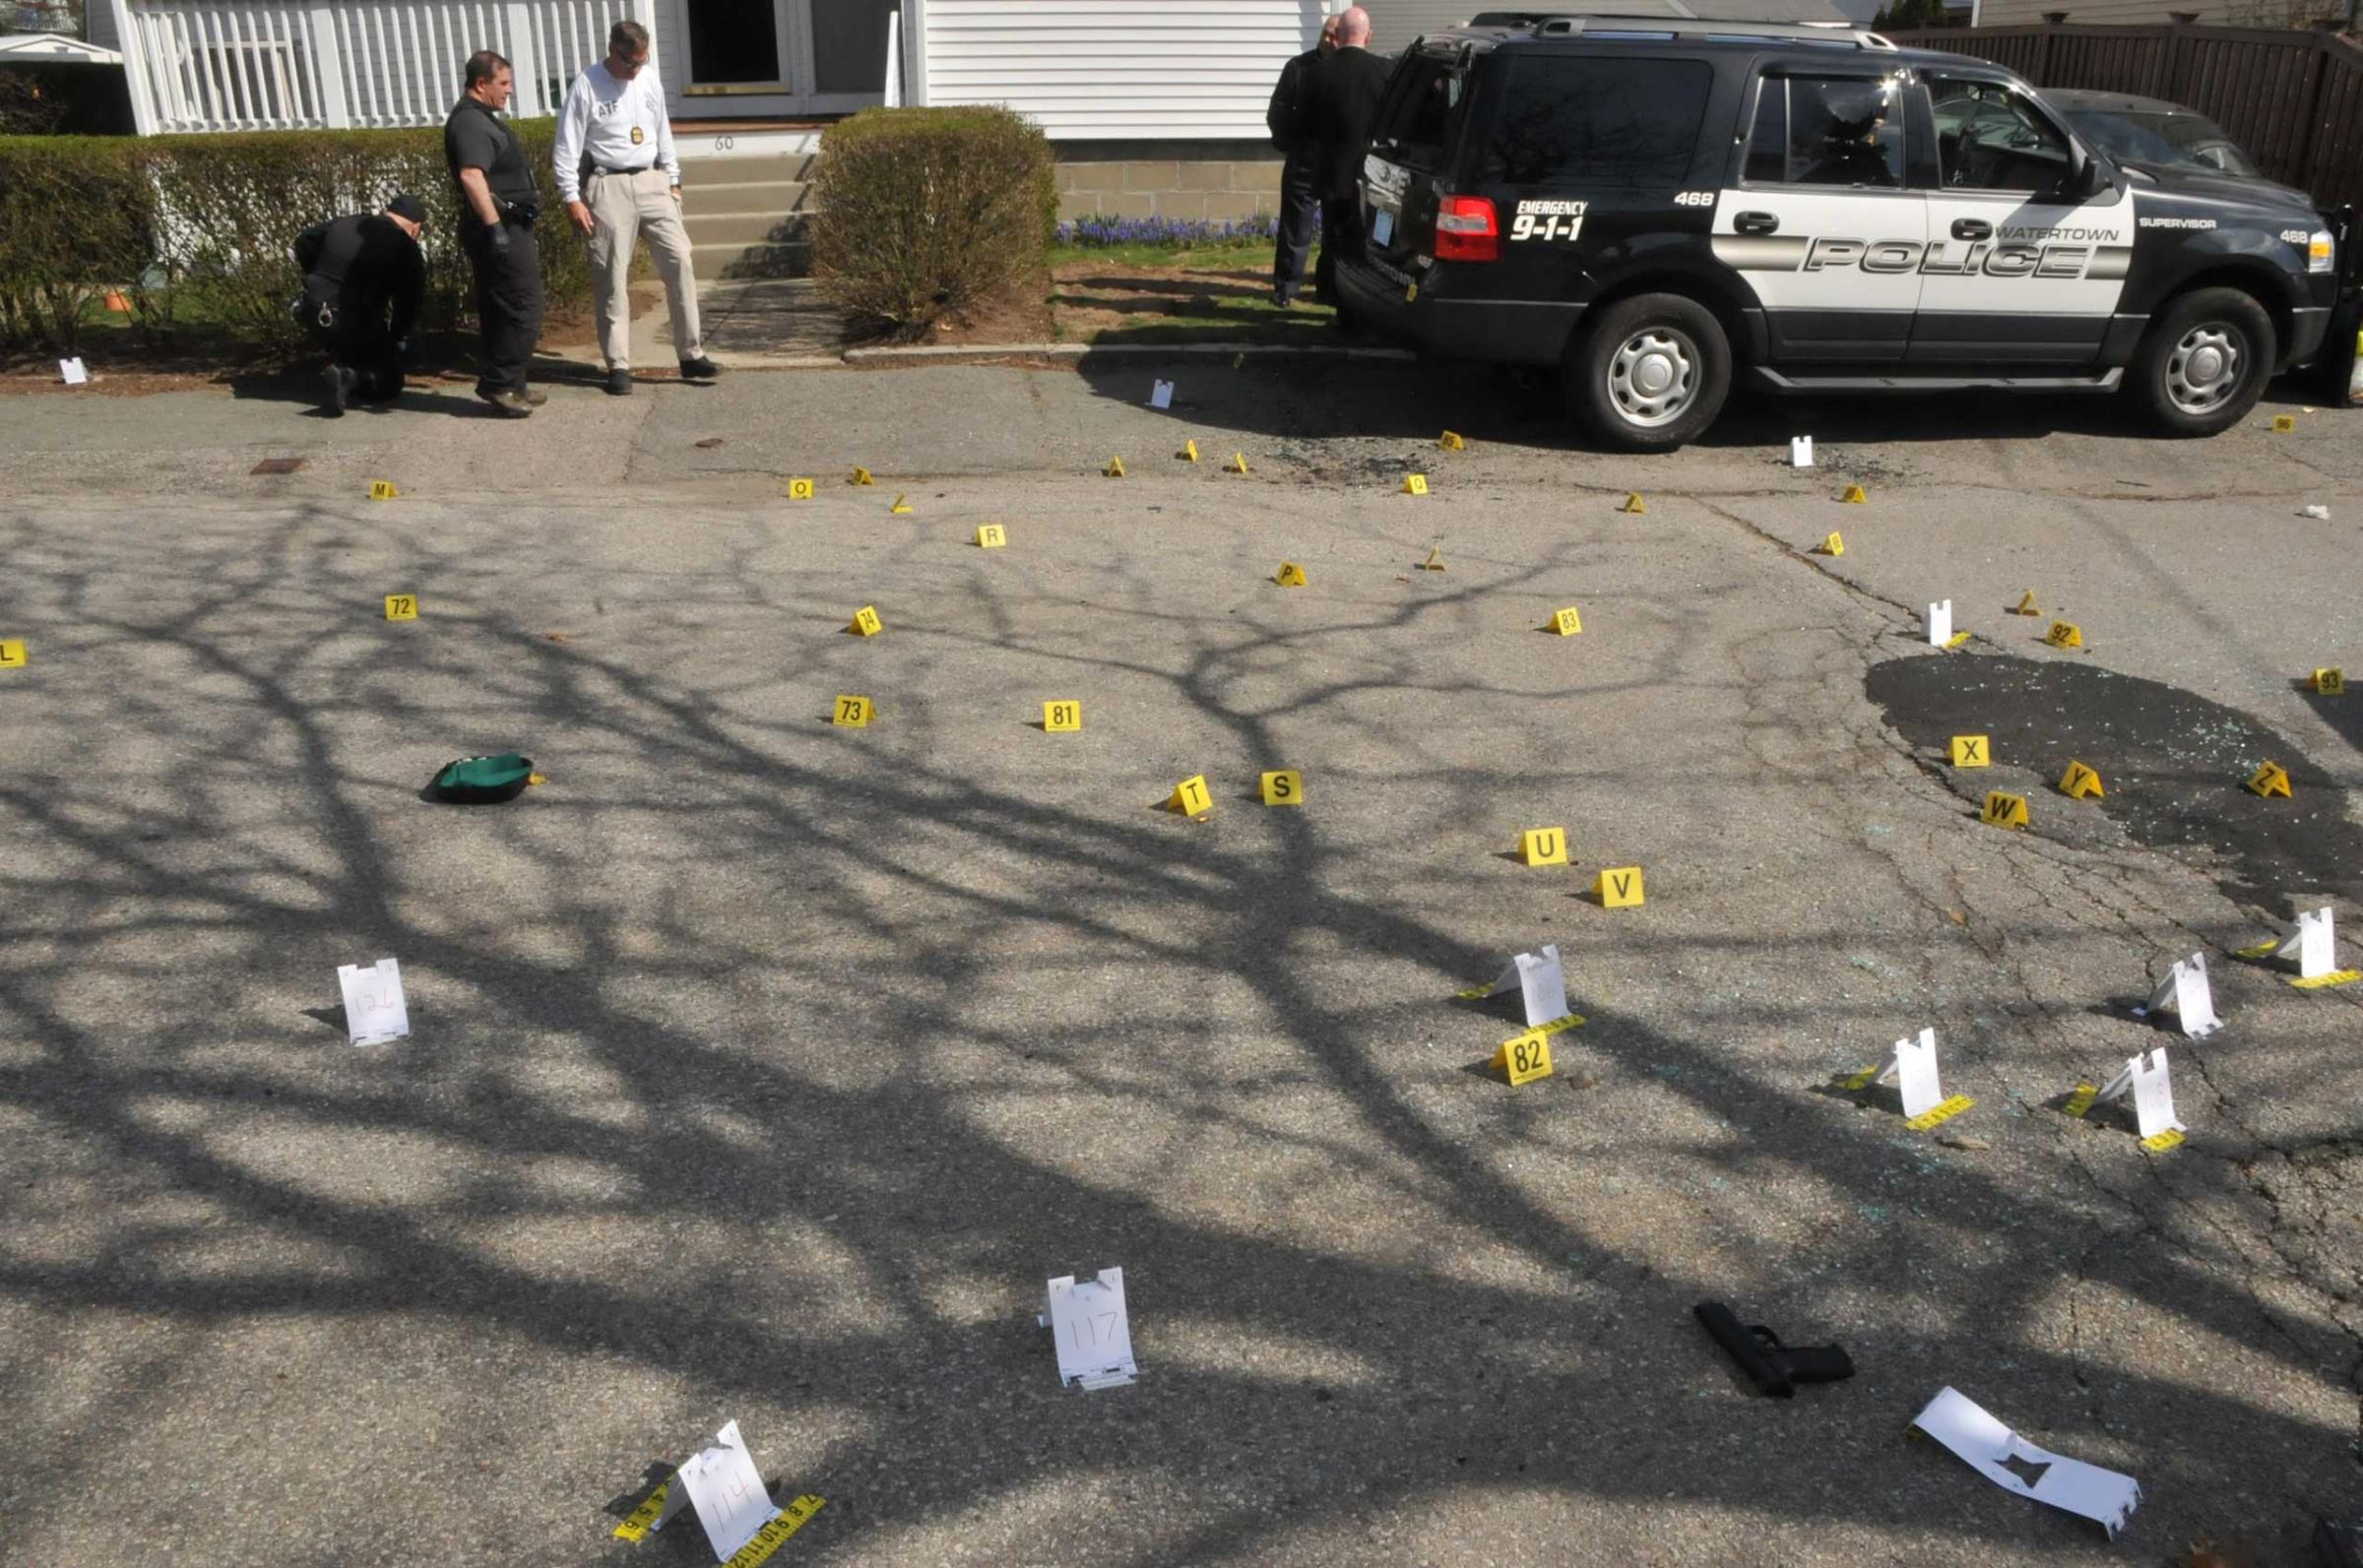 Evidence markers are seen on a street where Tamerlan and Dzhokhar Tsarnaev engaged in a gunfight with police in this undated handout evidence photo